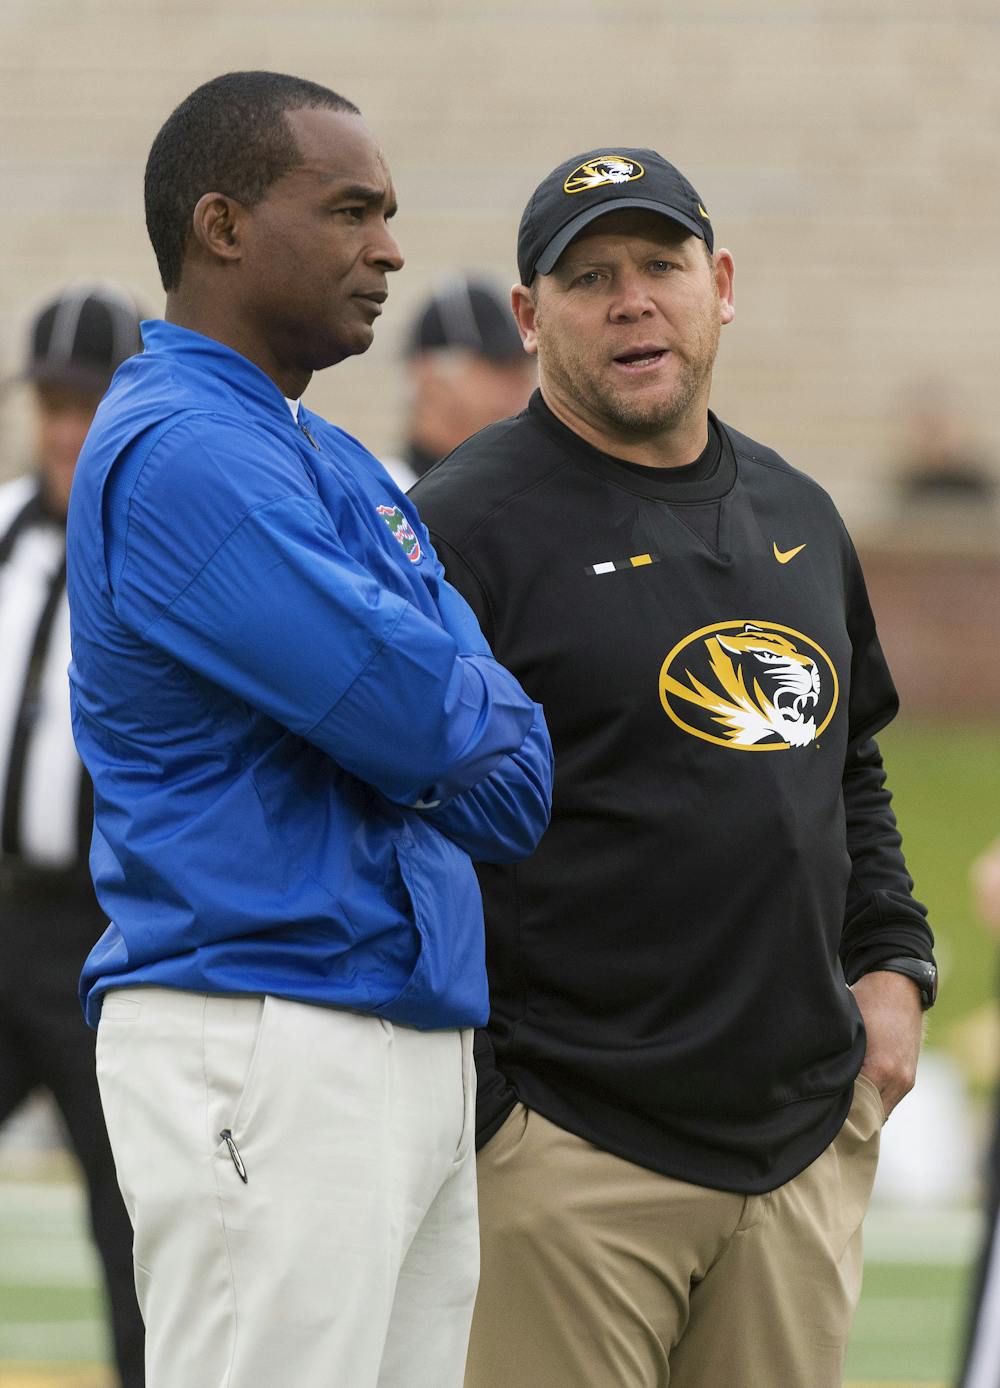 <p>Missouri head coach Barry Odom, right, talks with Florida head coach Randy Shannon, left, before the start of an NCAA college football game Saturday, Nov. 4, 2017, in Columbia, Mo. (AP Photo/L.G. Patterson)</p>